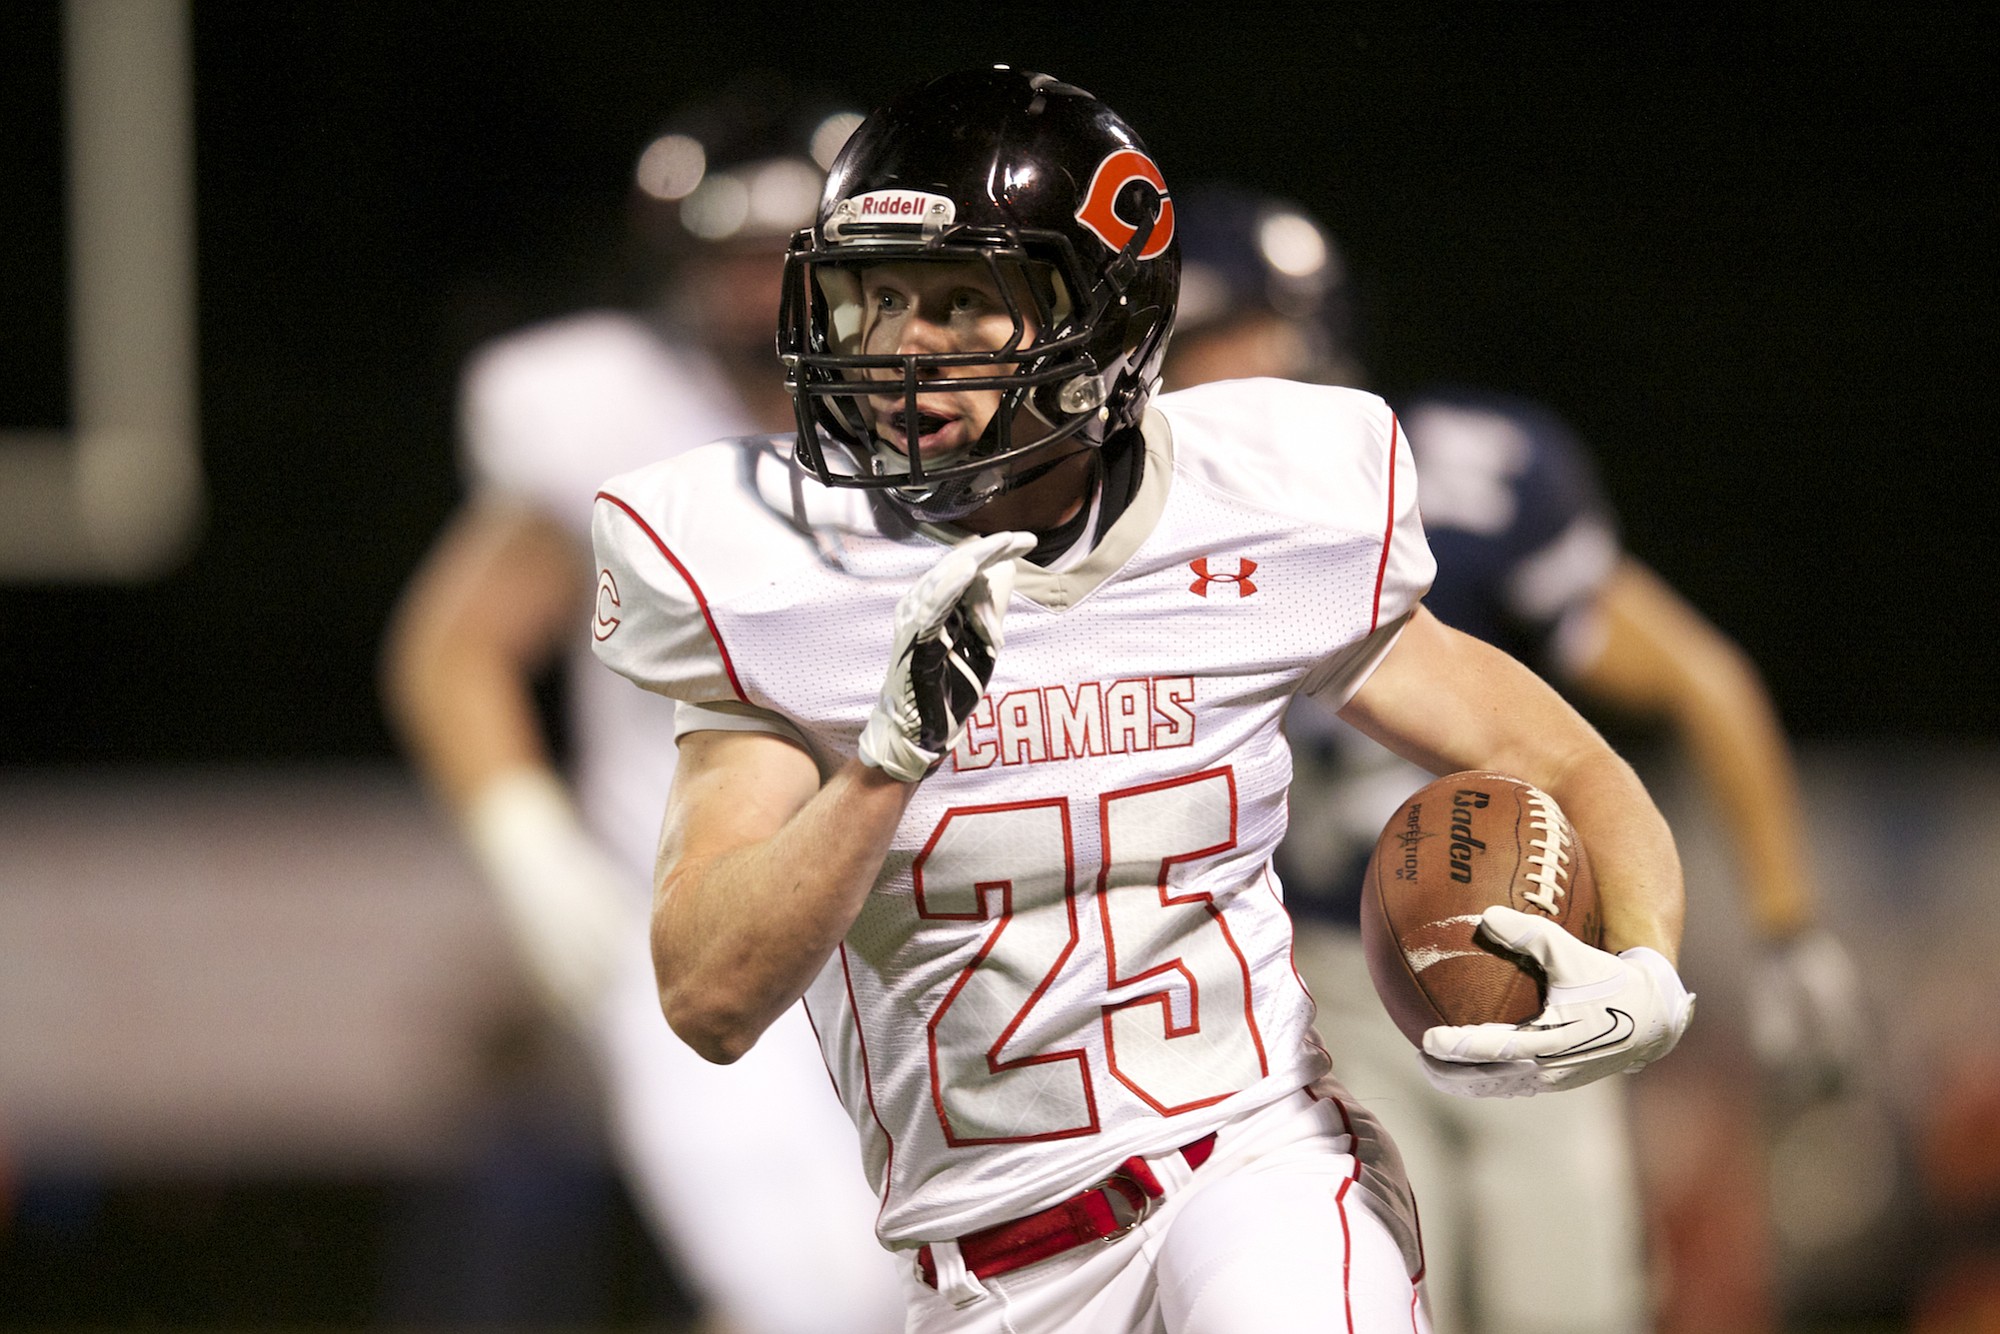 Camas running back Cole Zarcone carries the ball against Skyview at Kiggins Bowl, Friday, October 4, 2013.